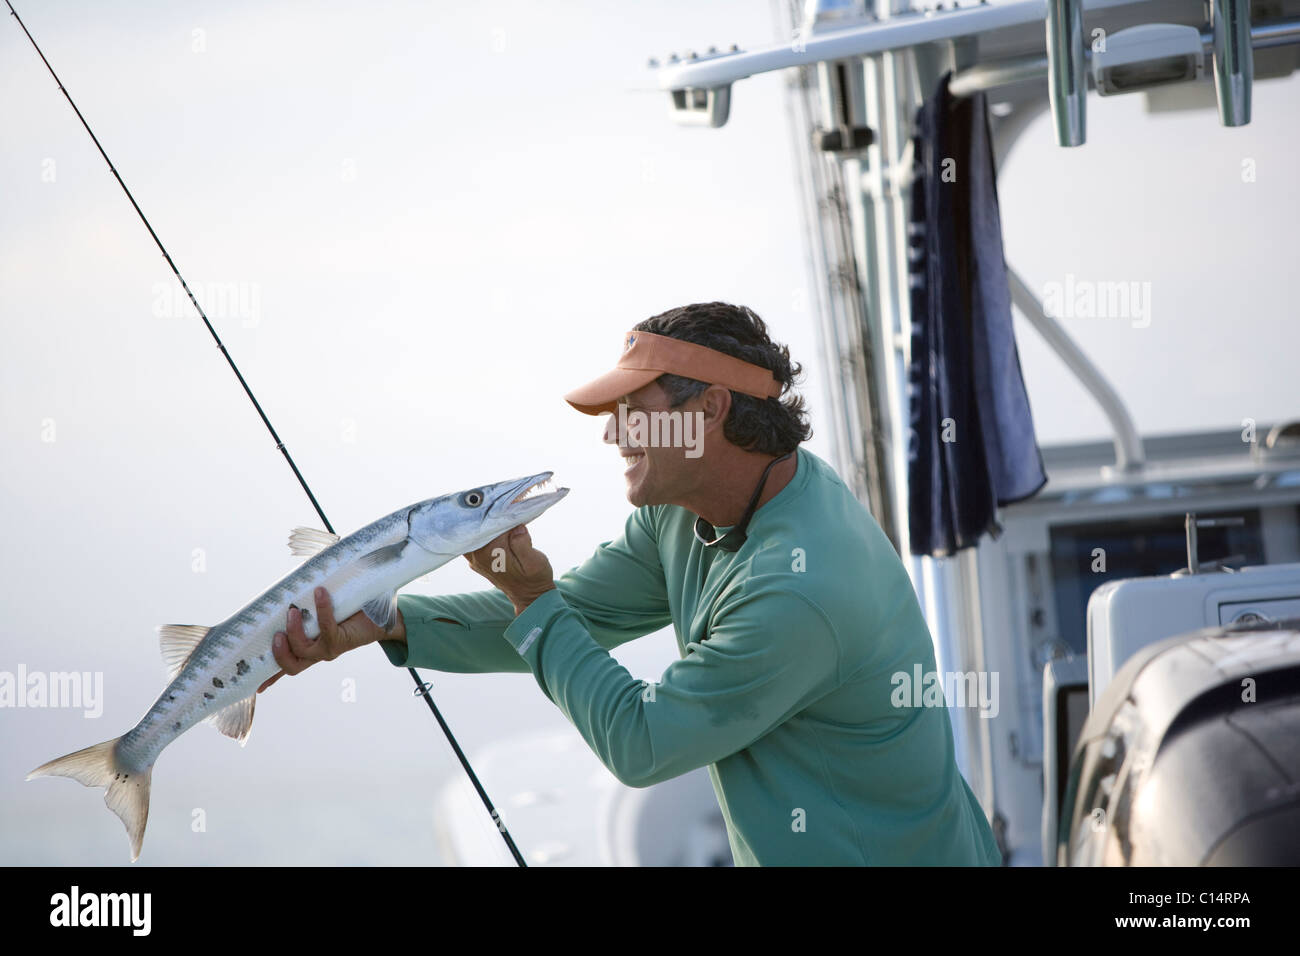 A fisherman smiles at the barracuda he has just caught. Stock Photo